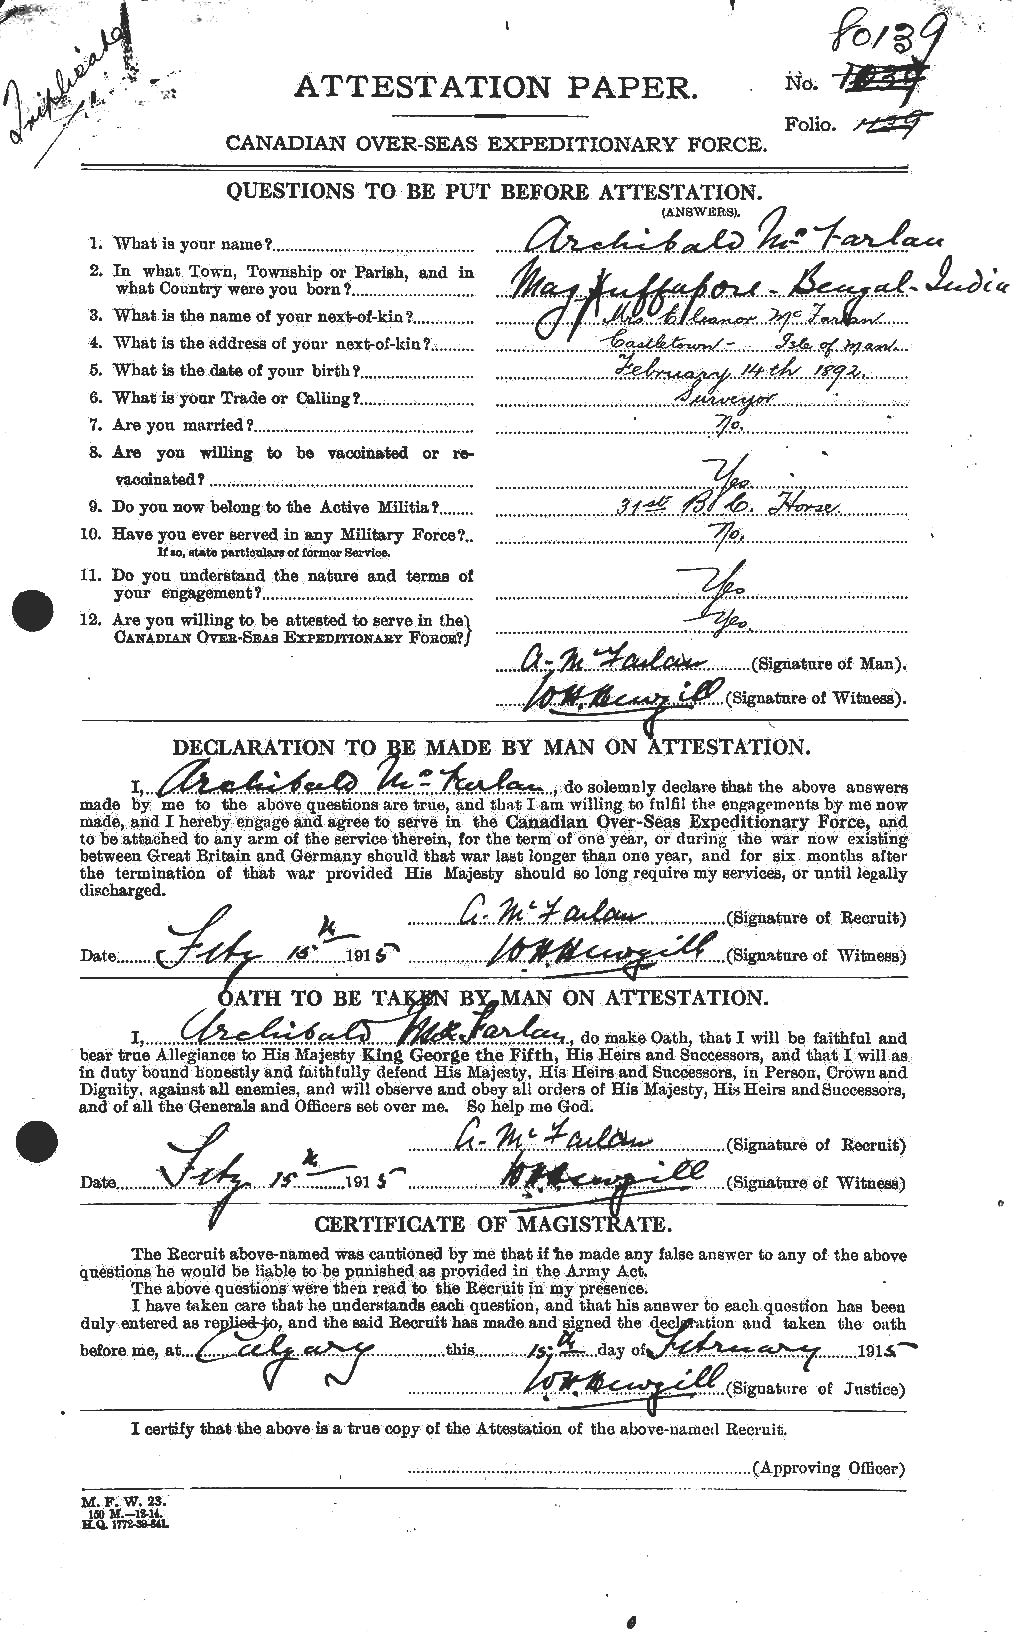 Personnel Records of the First World War - CEF 521254a